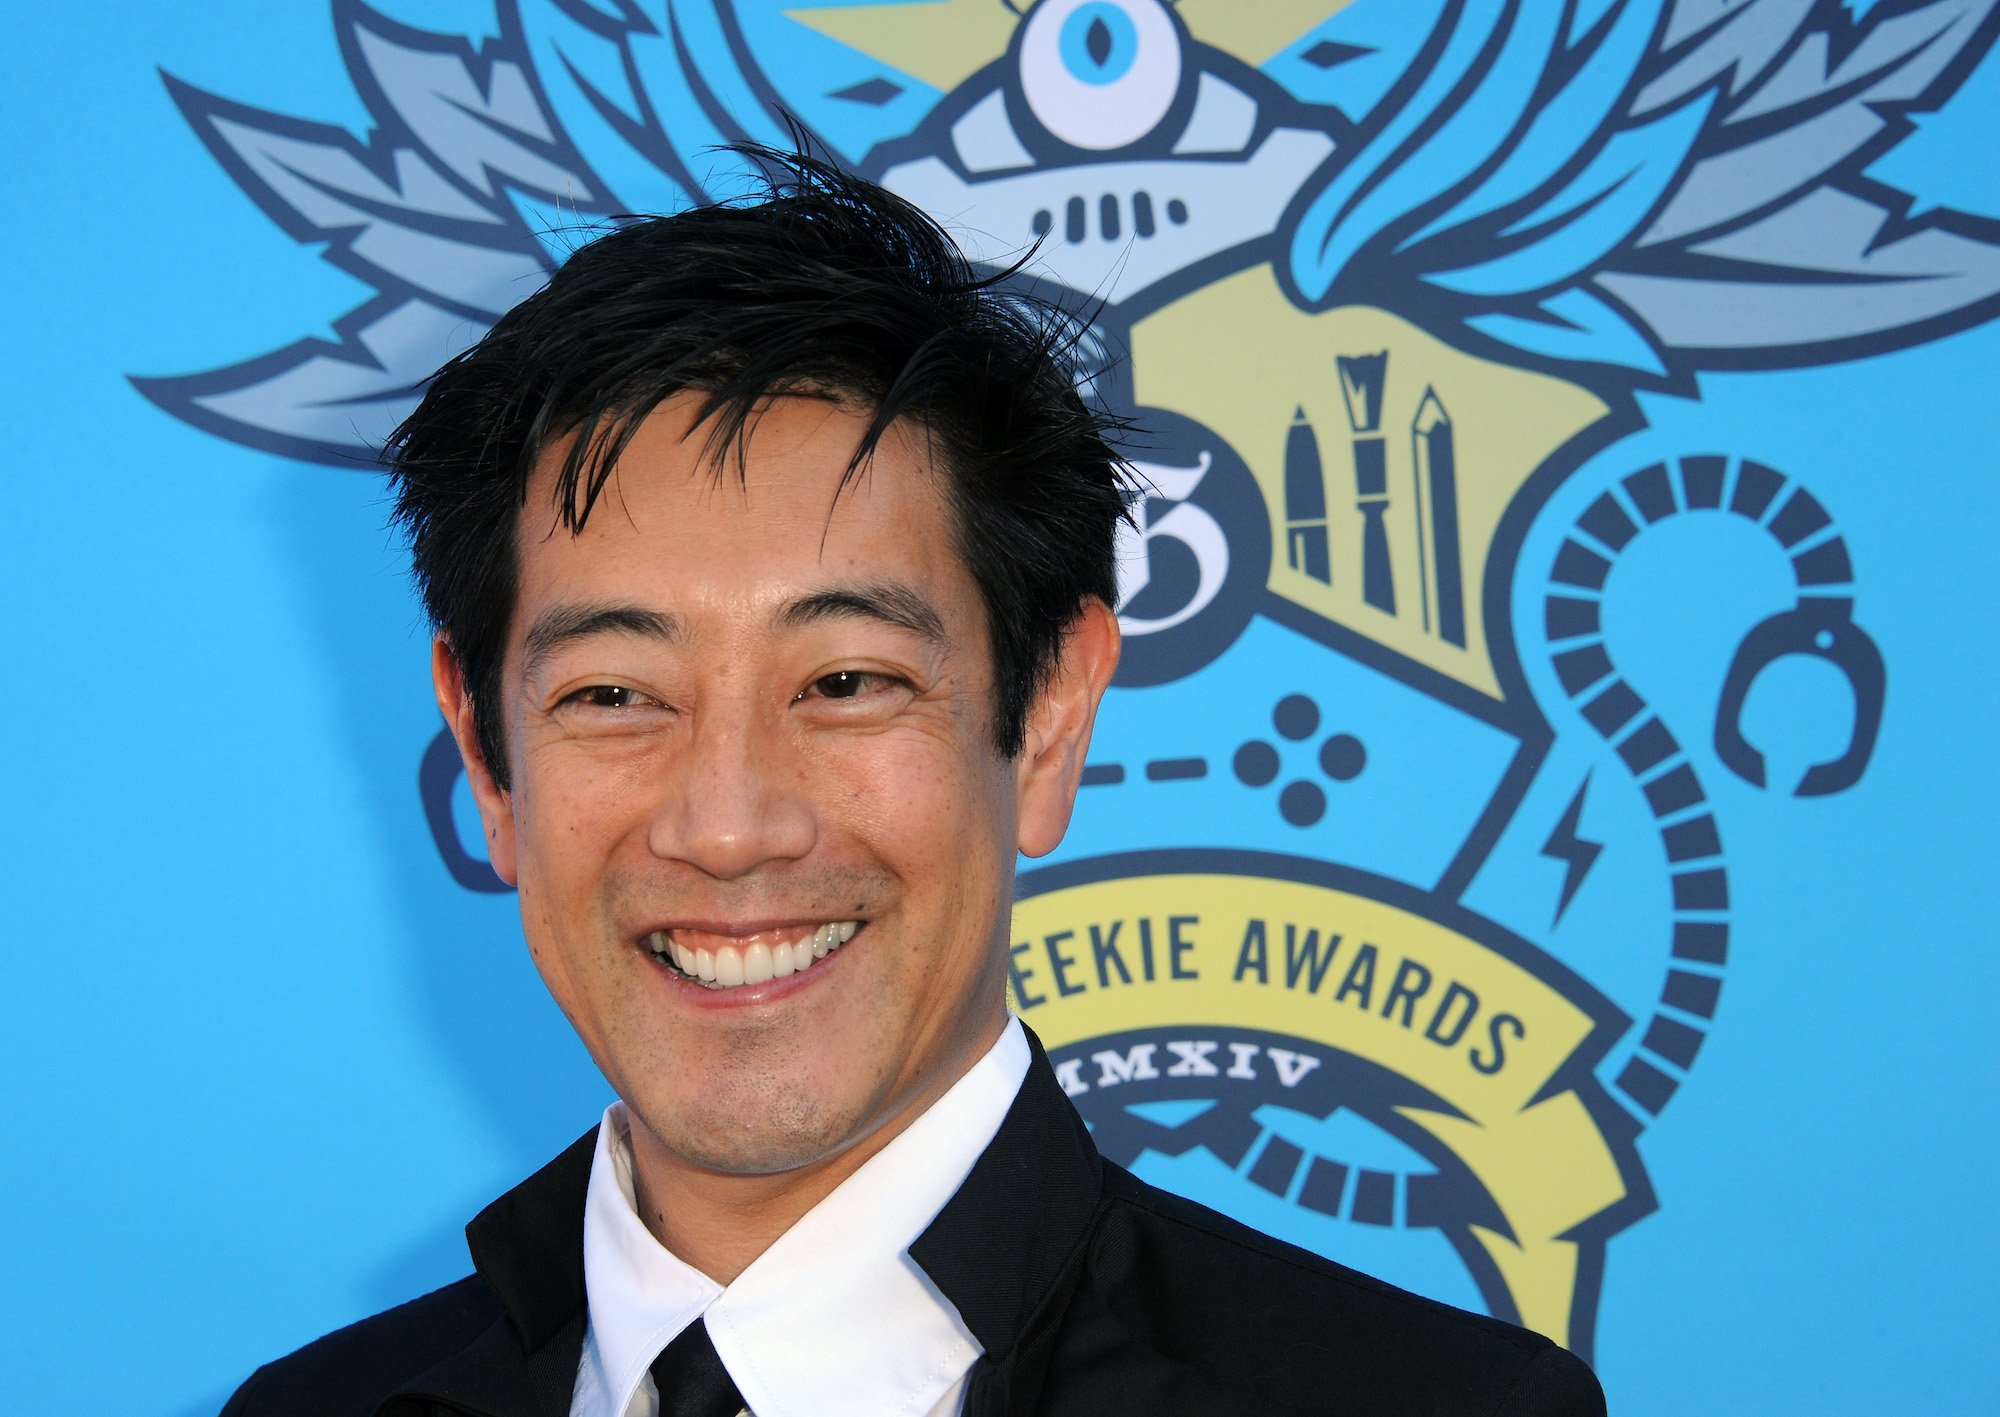 Grant Imahara poses for photographers as he arrives at the 2014  Geekie Awards